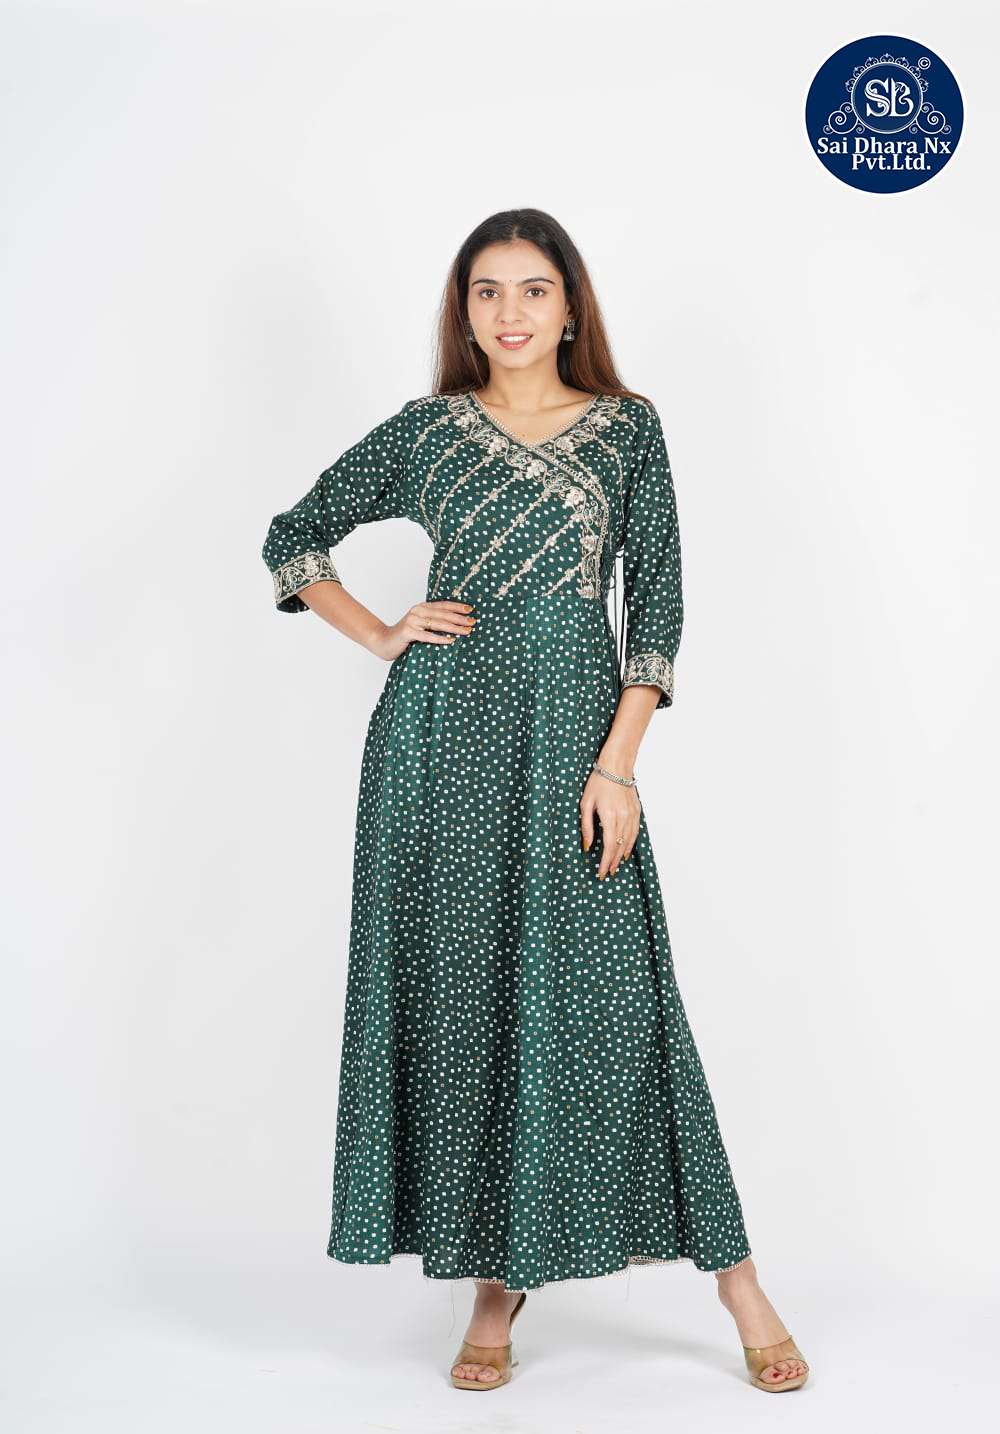 SAIDHARANX PRESENT LATEST ARRIVED MUSLIN FABRIC BASED GREEN ANARKALI GOWN COLLECTION WHOLESALE SHOP IN SURAT - SaiDharaNx